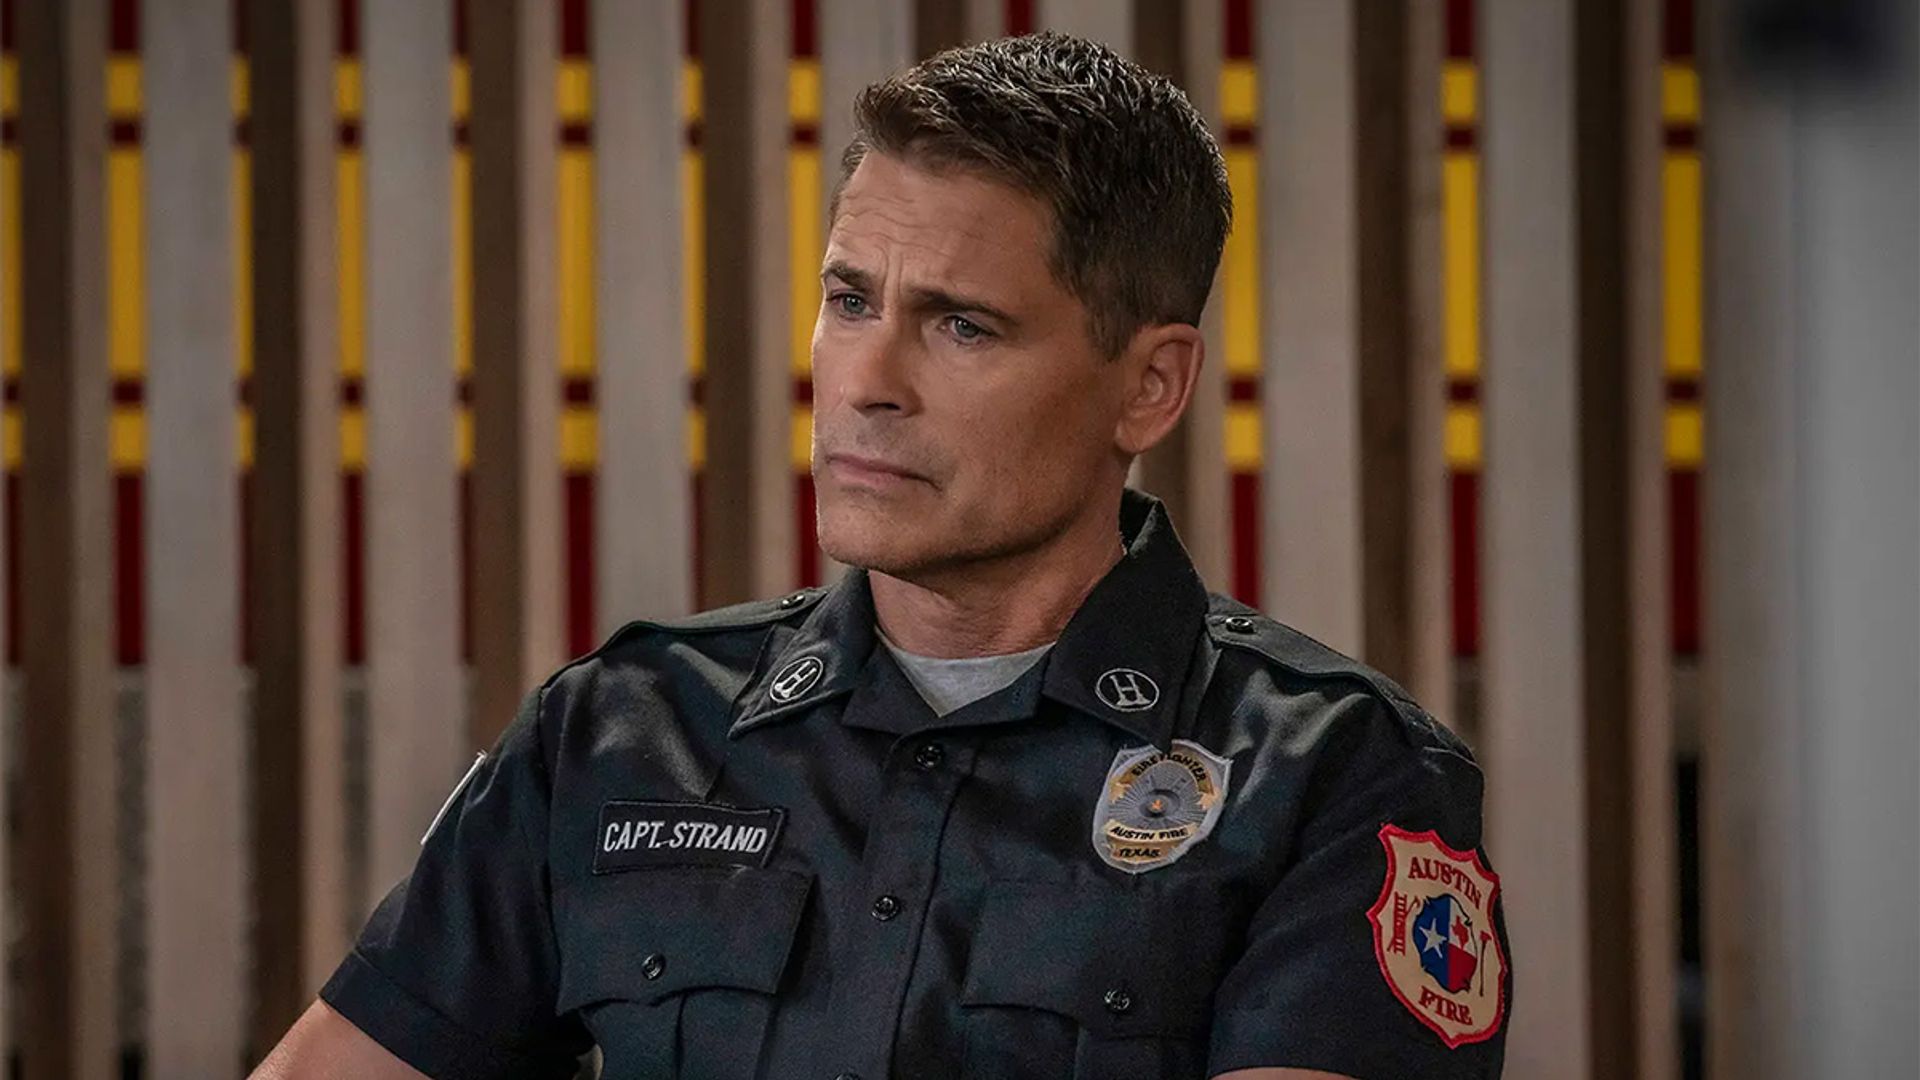 9-1-1 Lone Star's Rob Lowe reveals surprising side effect of working with brother Chad Lowe